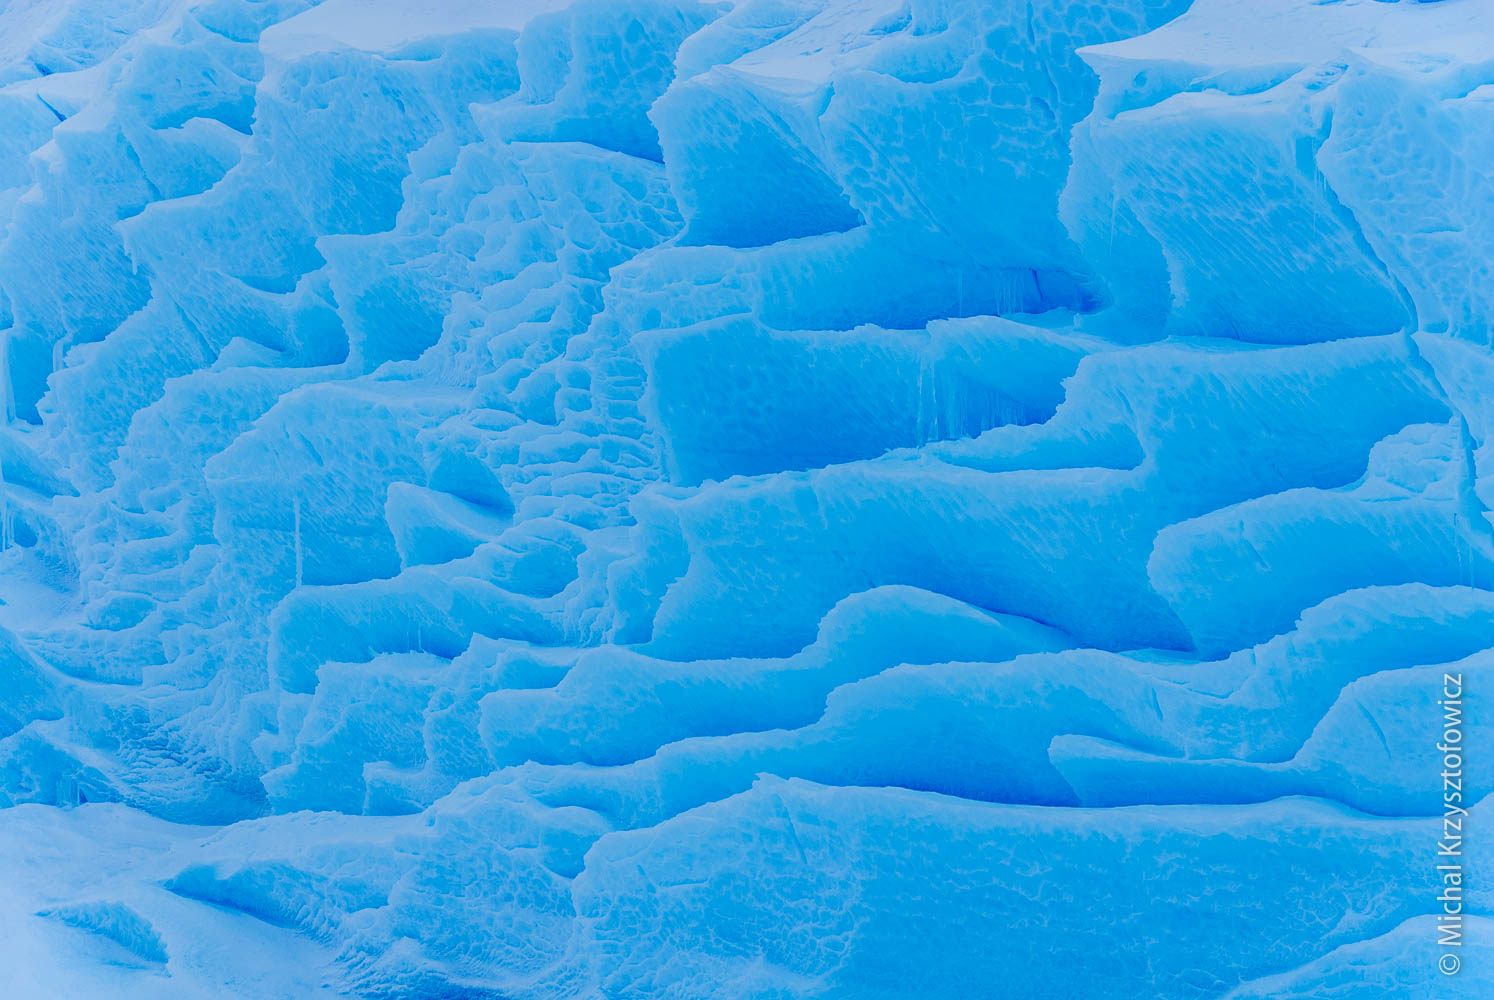 Fish-scale like features on ice wall